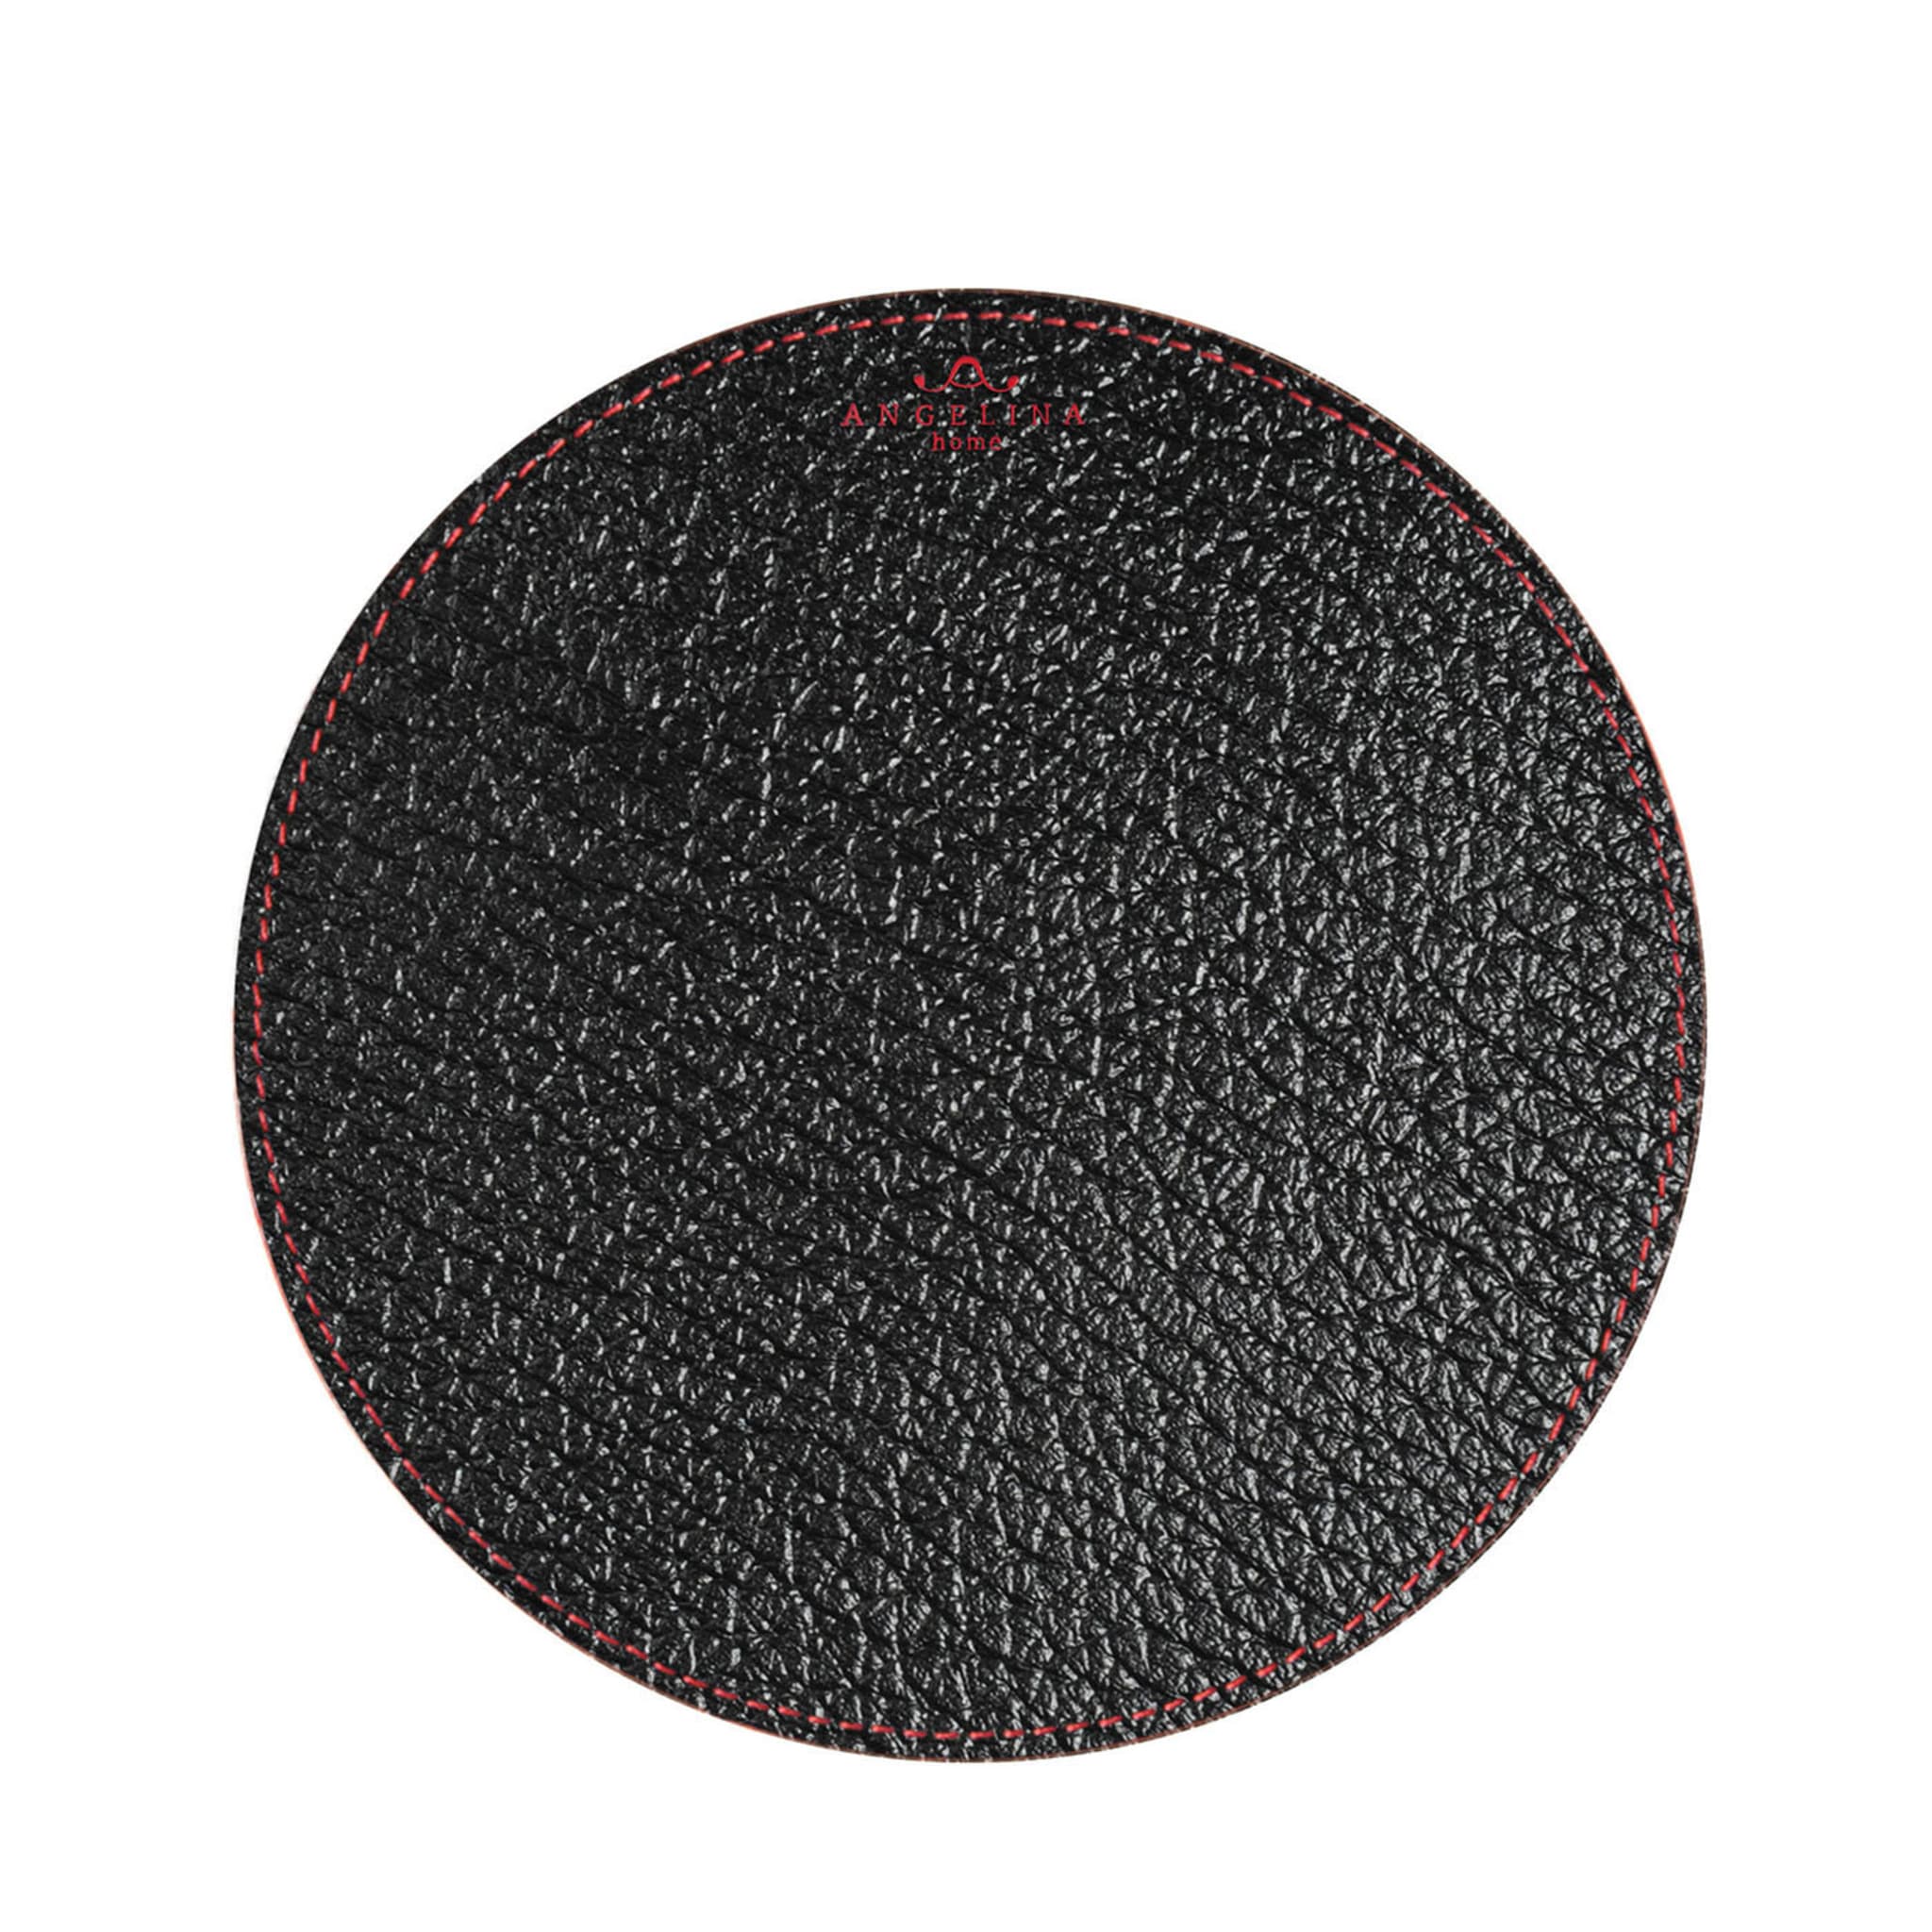 Tanzania Small Set of 2 Round Black Leather Placemats - Alternative view 1